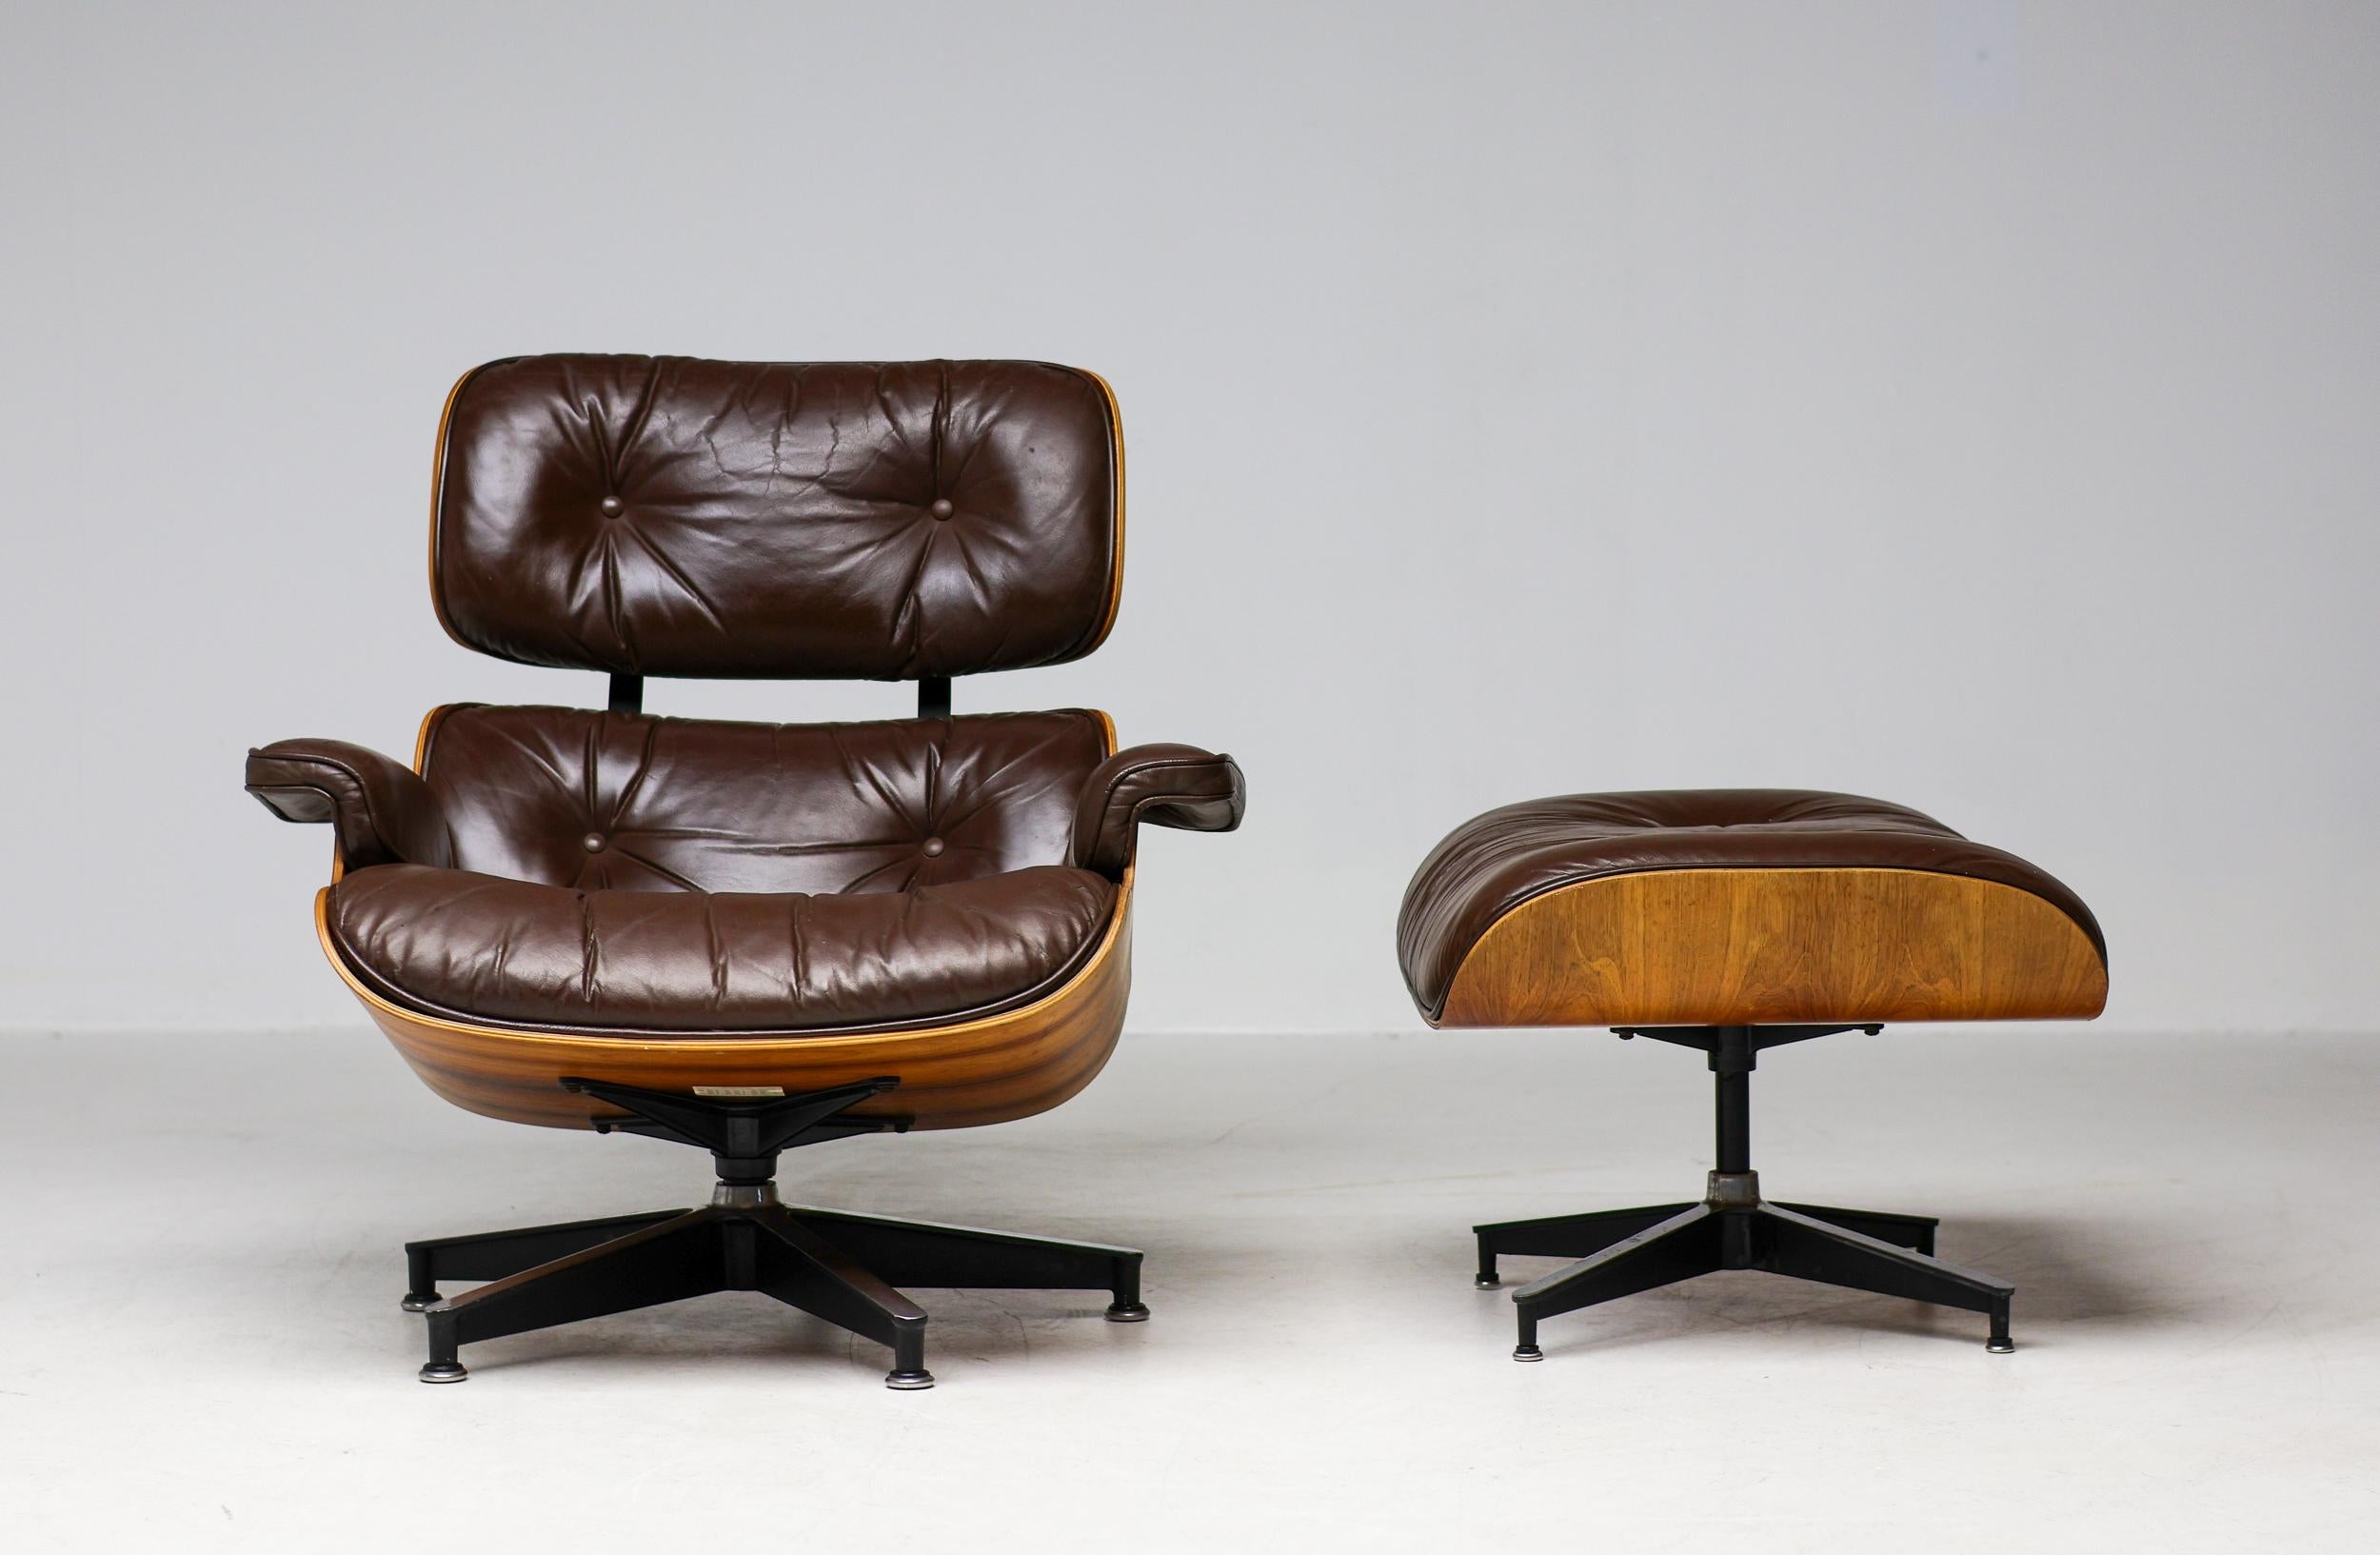 Early Lounge Chair and Ottoman designed by Charles and Ray Eames for Herman Miller, marked with date of delivery 11/7 1975 on the label at the bottom of the ottoman.
Since the production started in 1958, this is an early example of this design